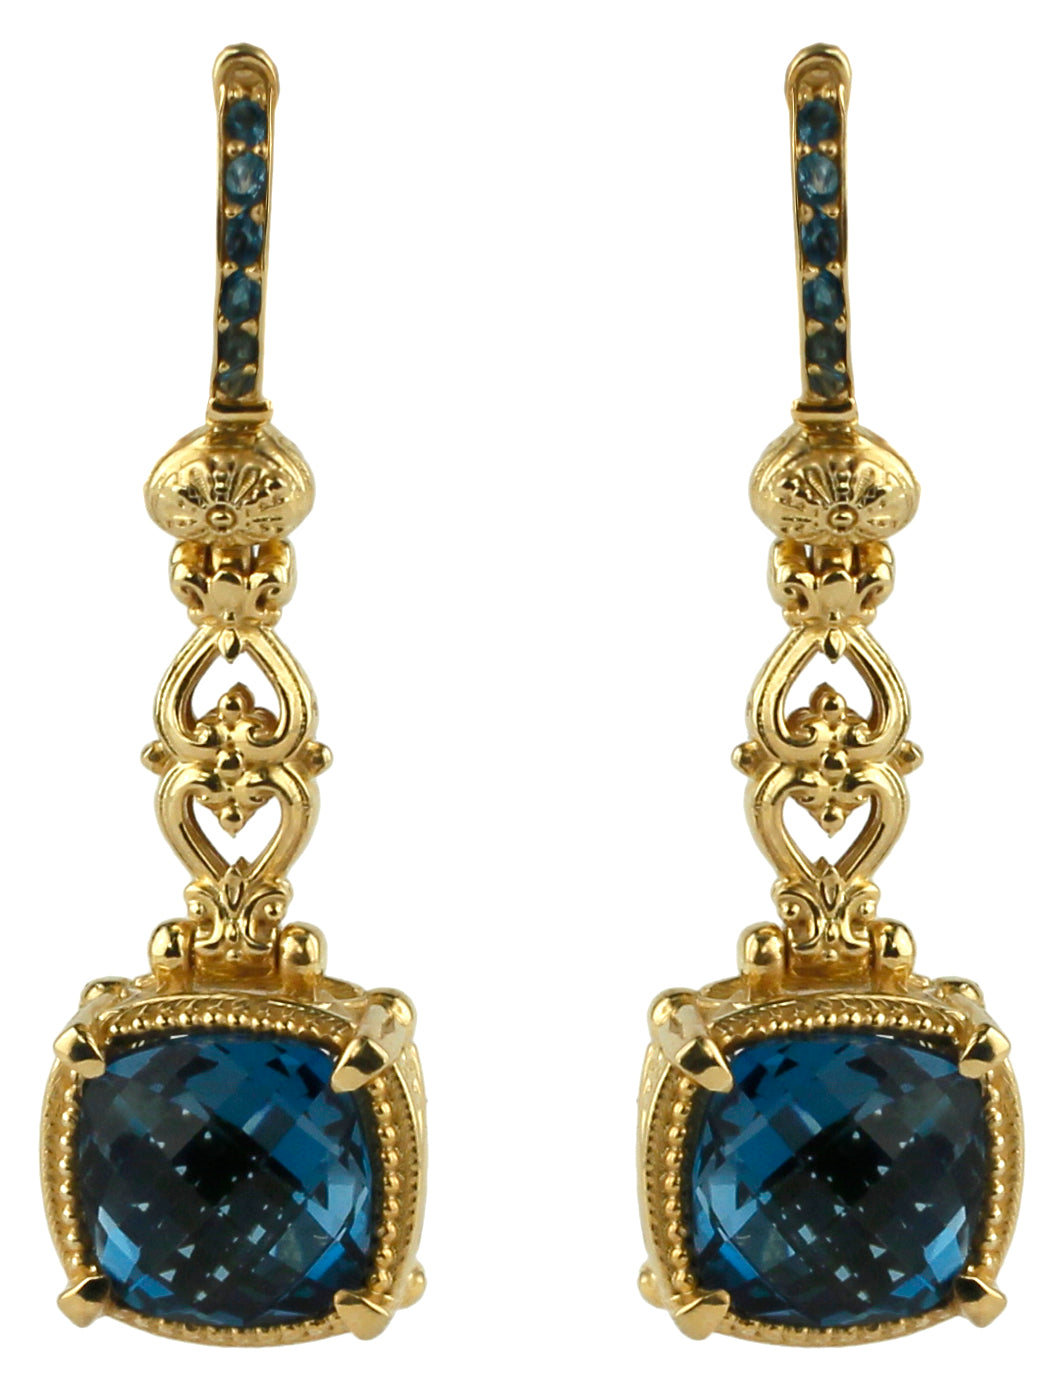 KONSTANTINO 18KT GOLD (7.5GR +/-) LONDON BLUE TOPAZ (5.6CT +/-) EARRINGS FROM THE FLAMENCO GOLD  COL